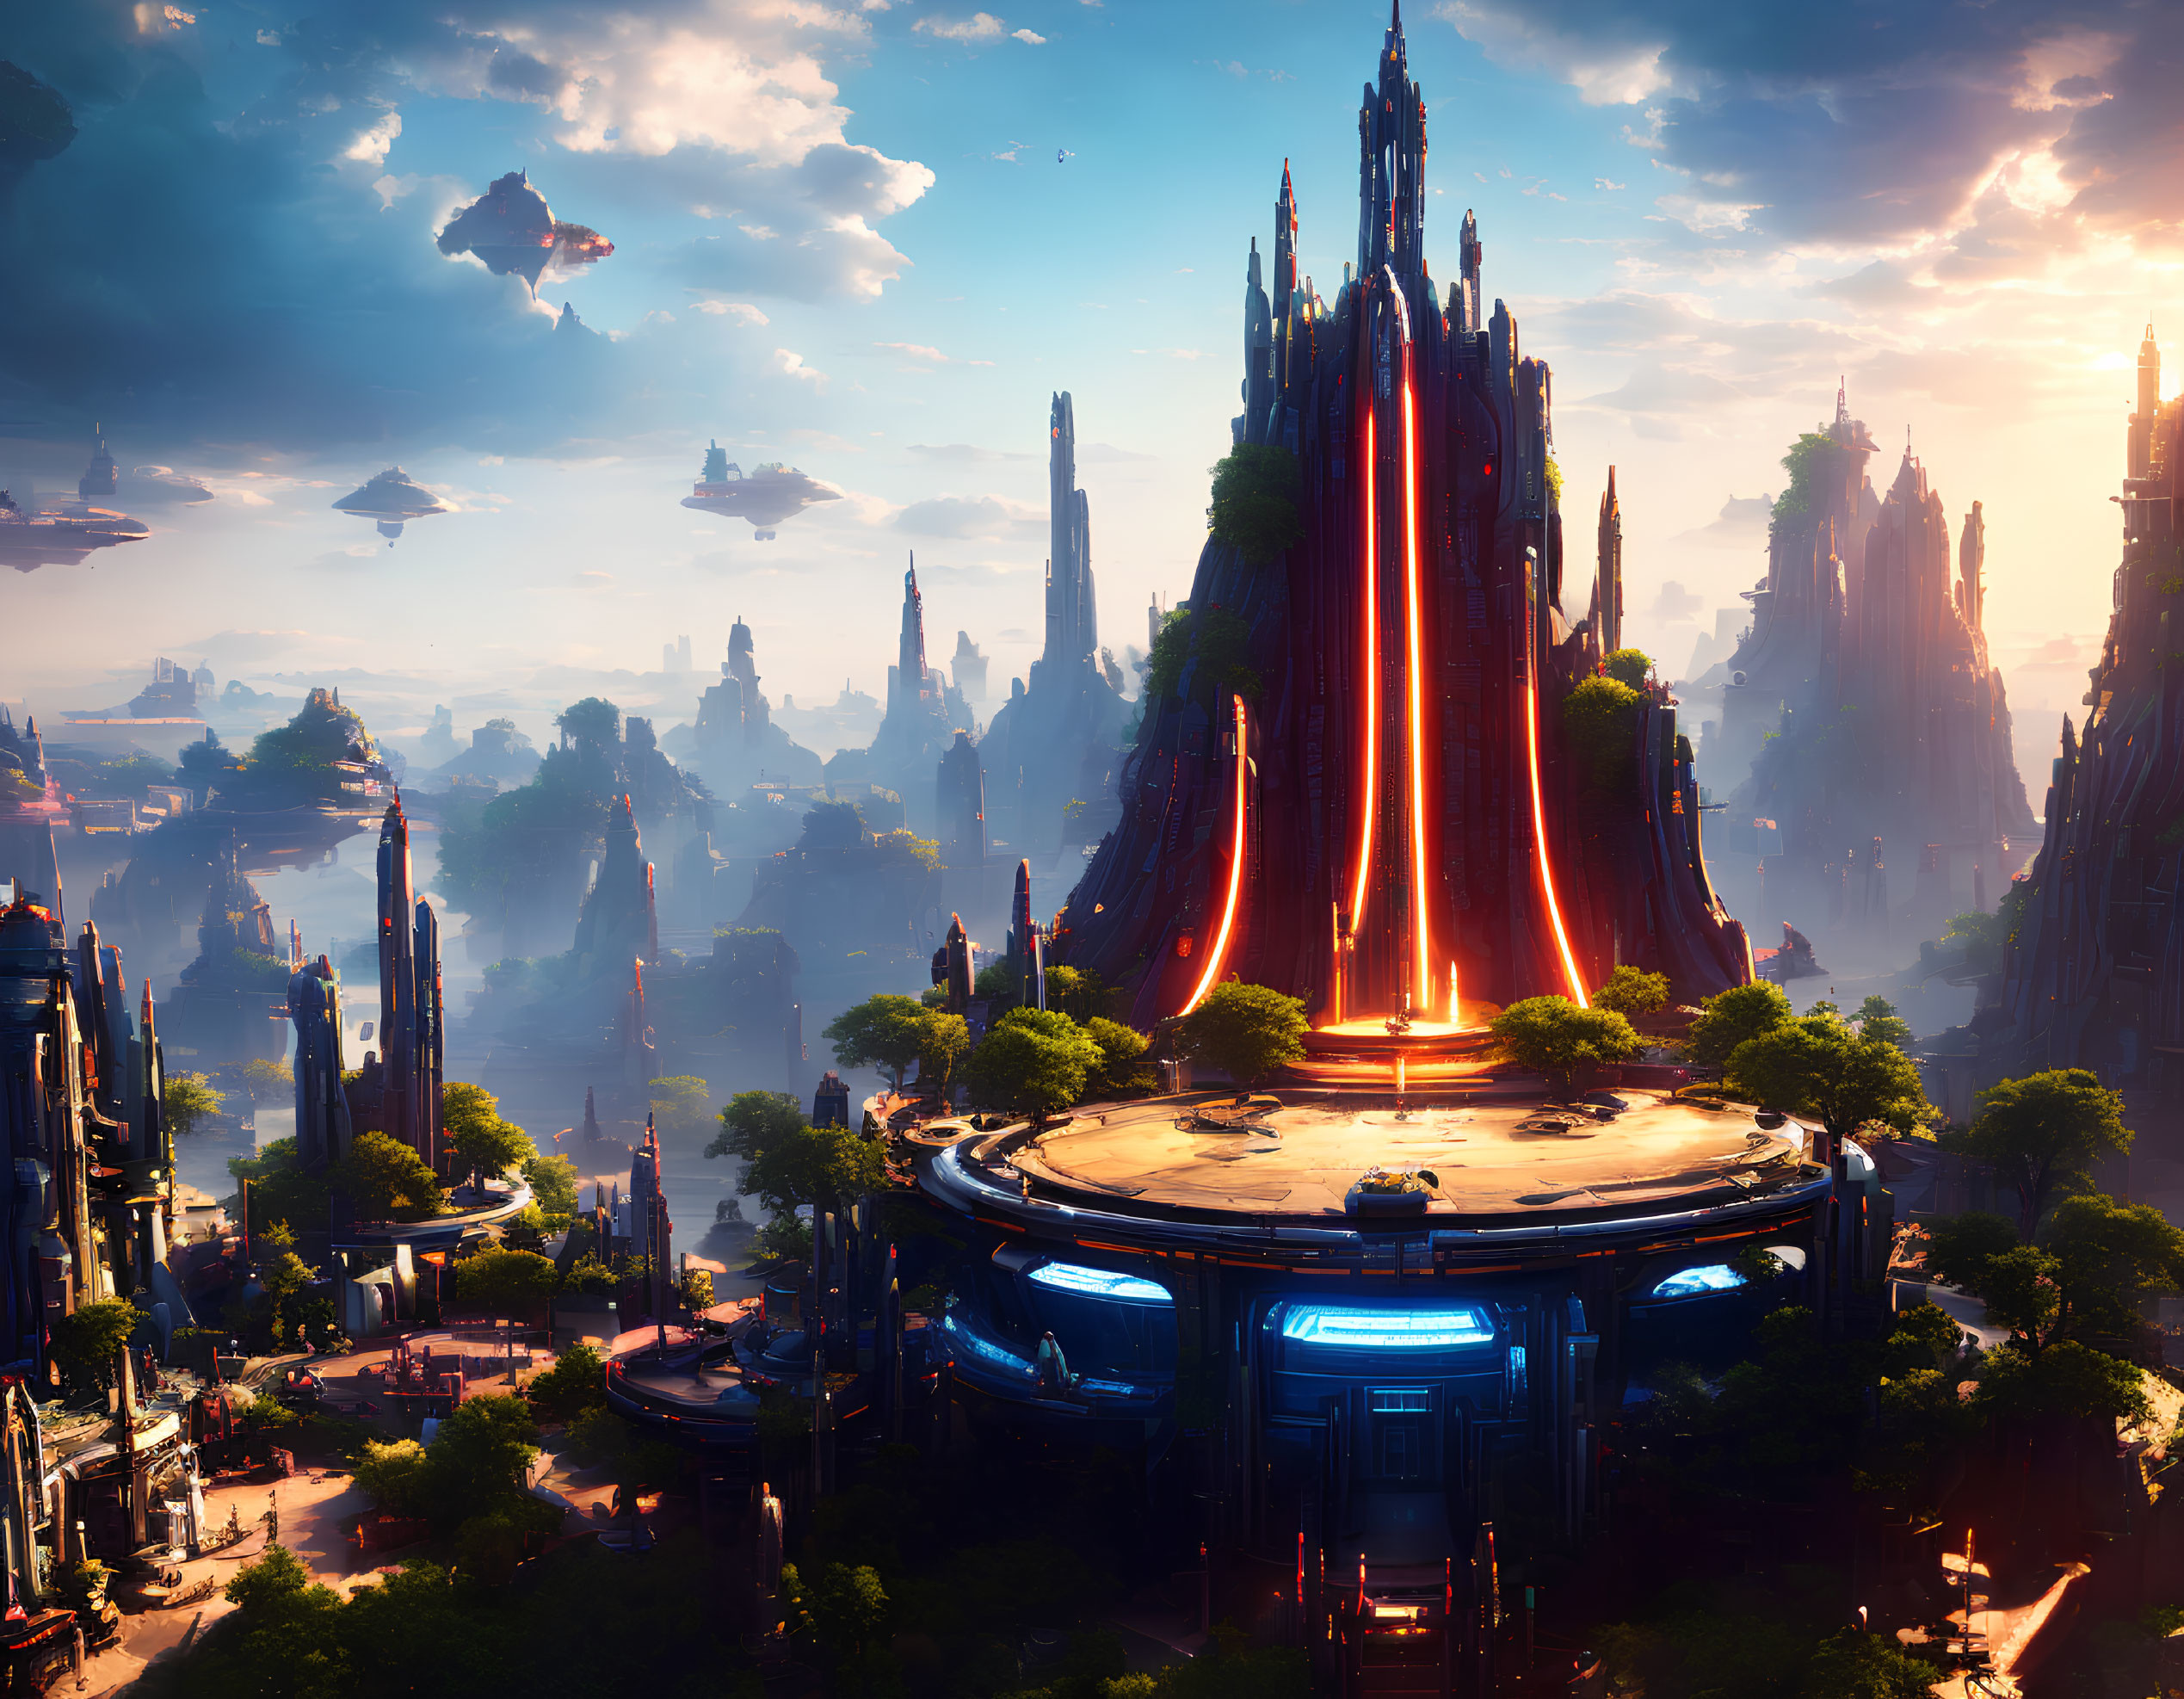 Futuristic cityscape with spires, lava feature, flying vehicles, and lush greenery